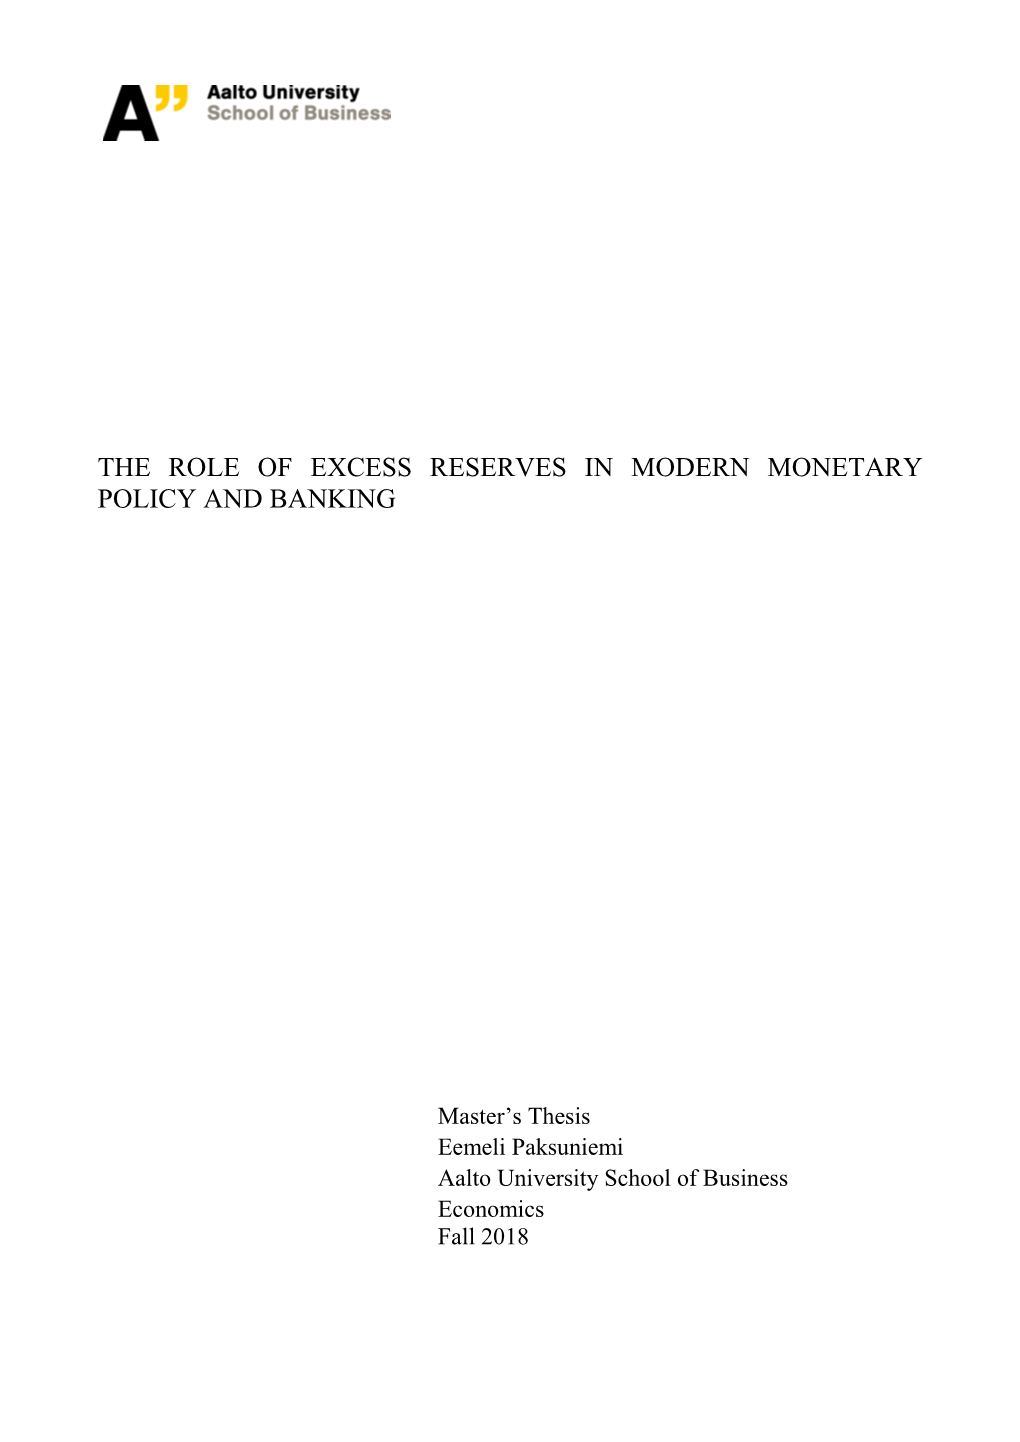 The Role of Excess Reserves in Modern Monetary Policy and Banking